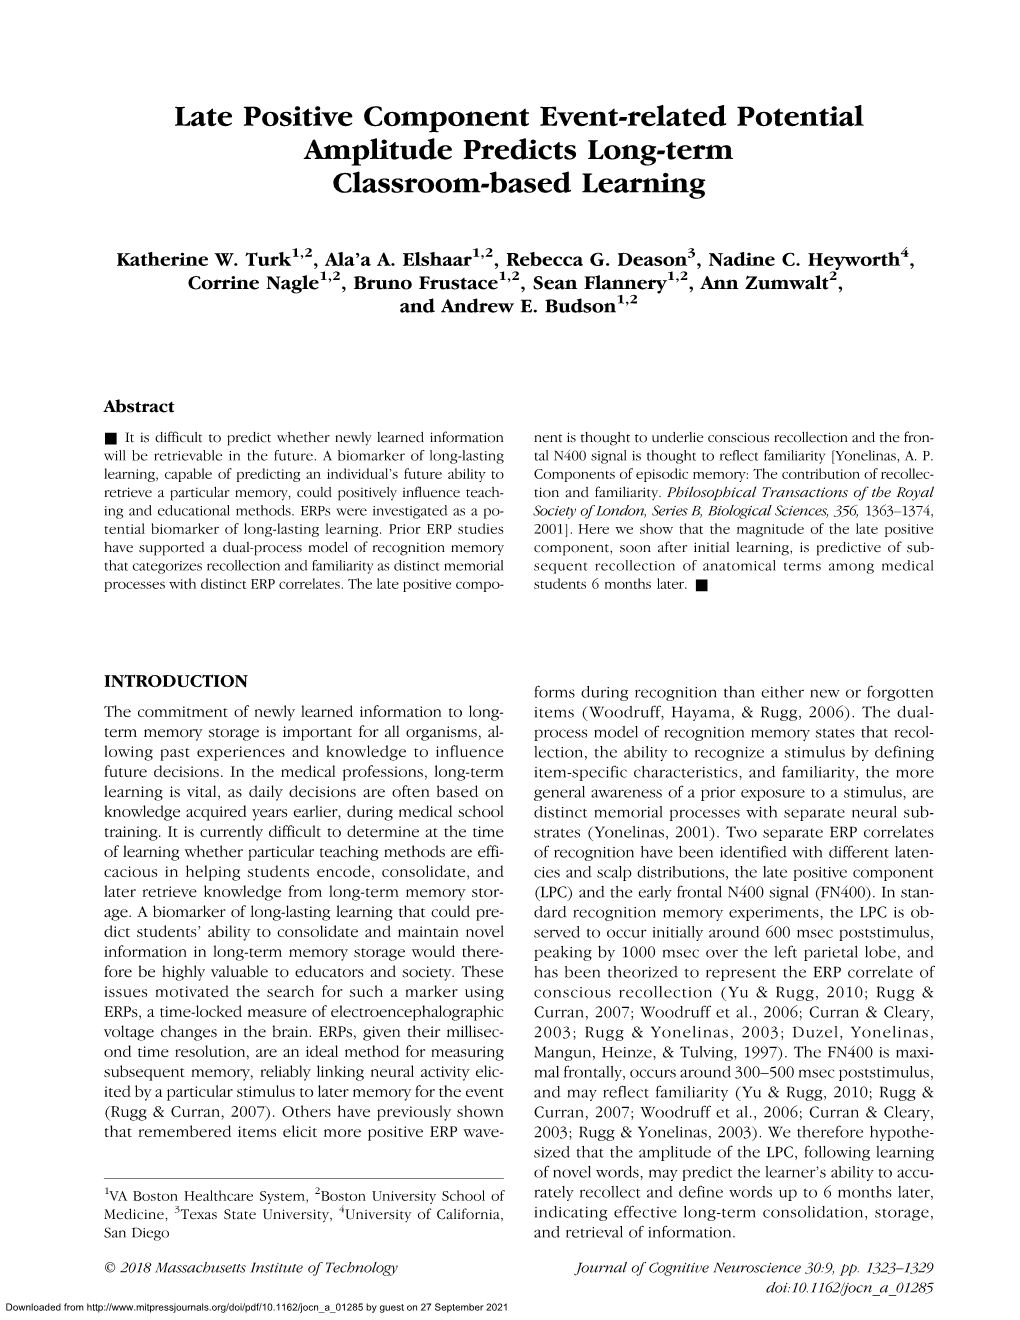 Late Positive Component Event-Related Potential Amplitude Predicts Long-Term Classroom-Based Learning